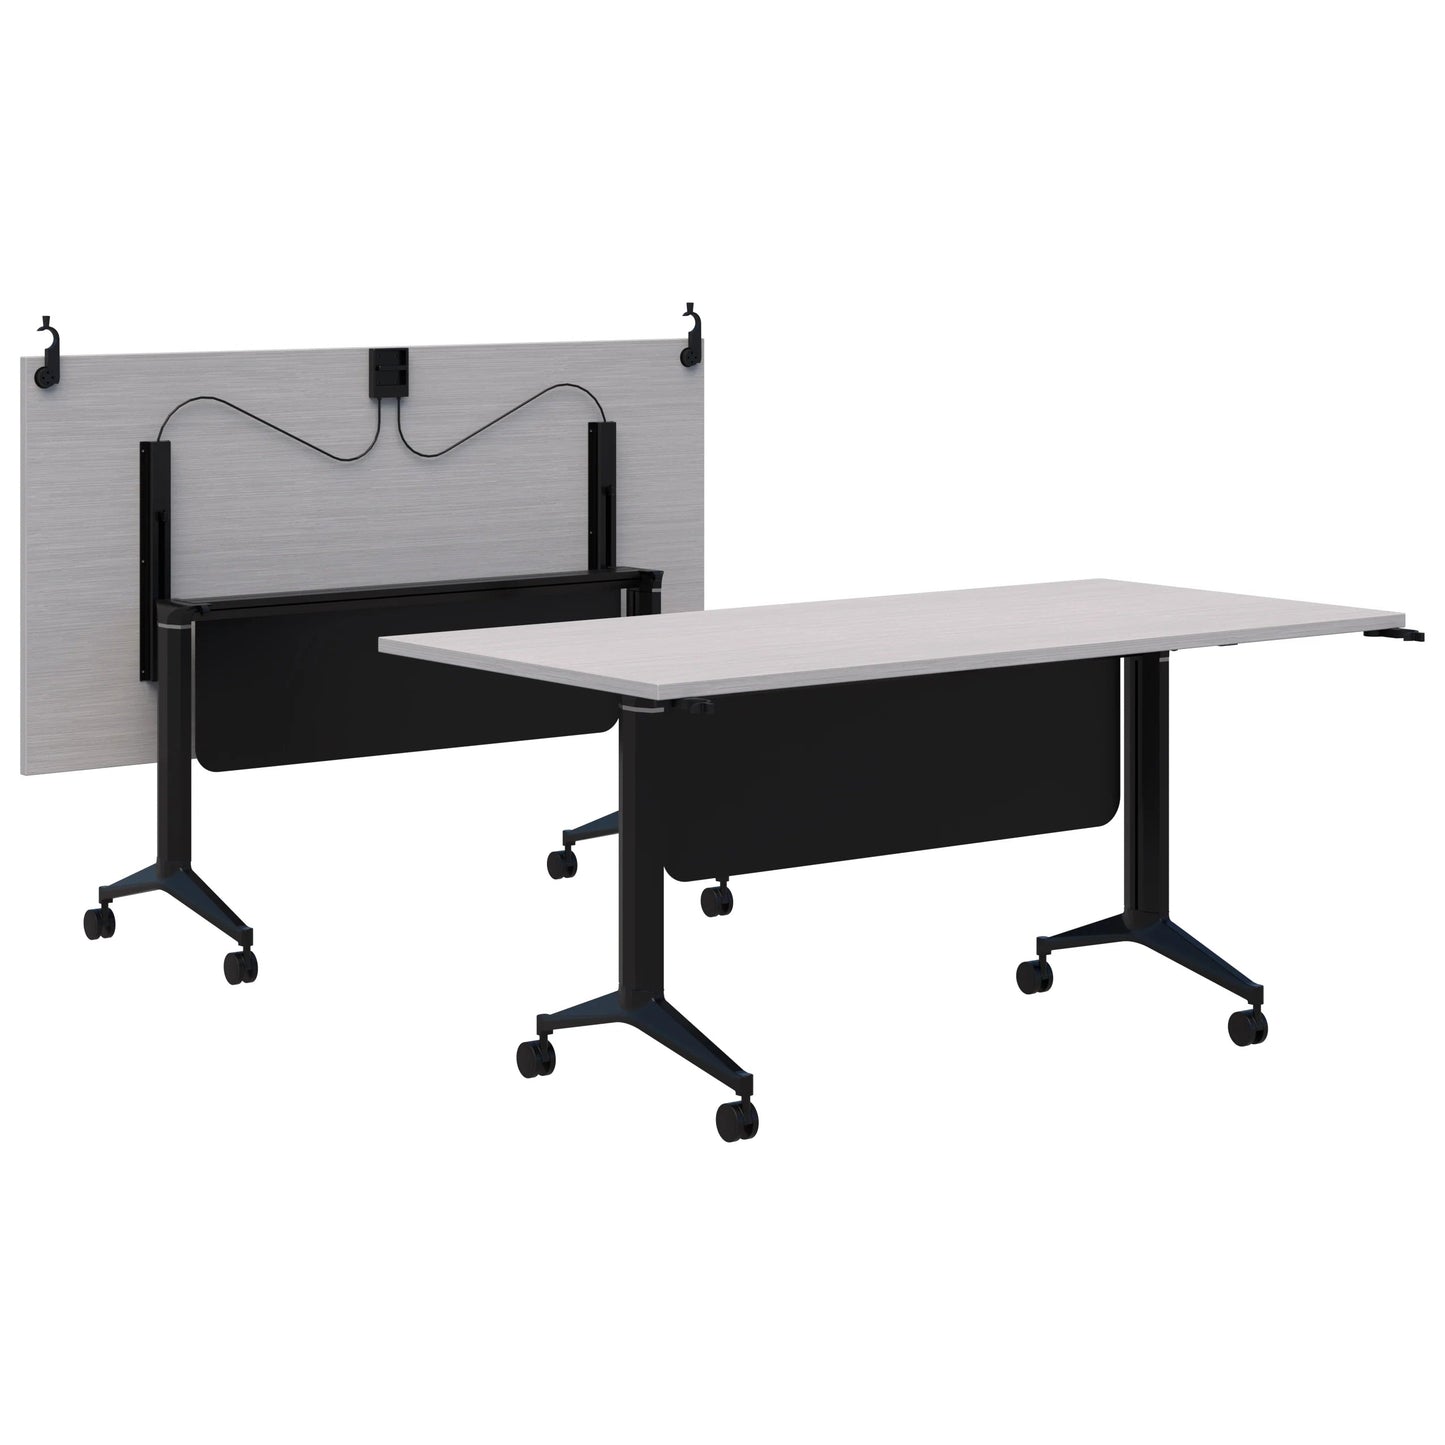 Boost Flip Table with Modesty and Connectors